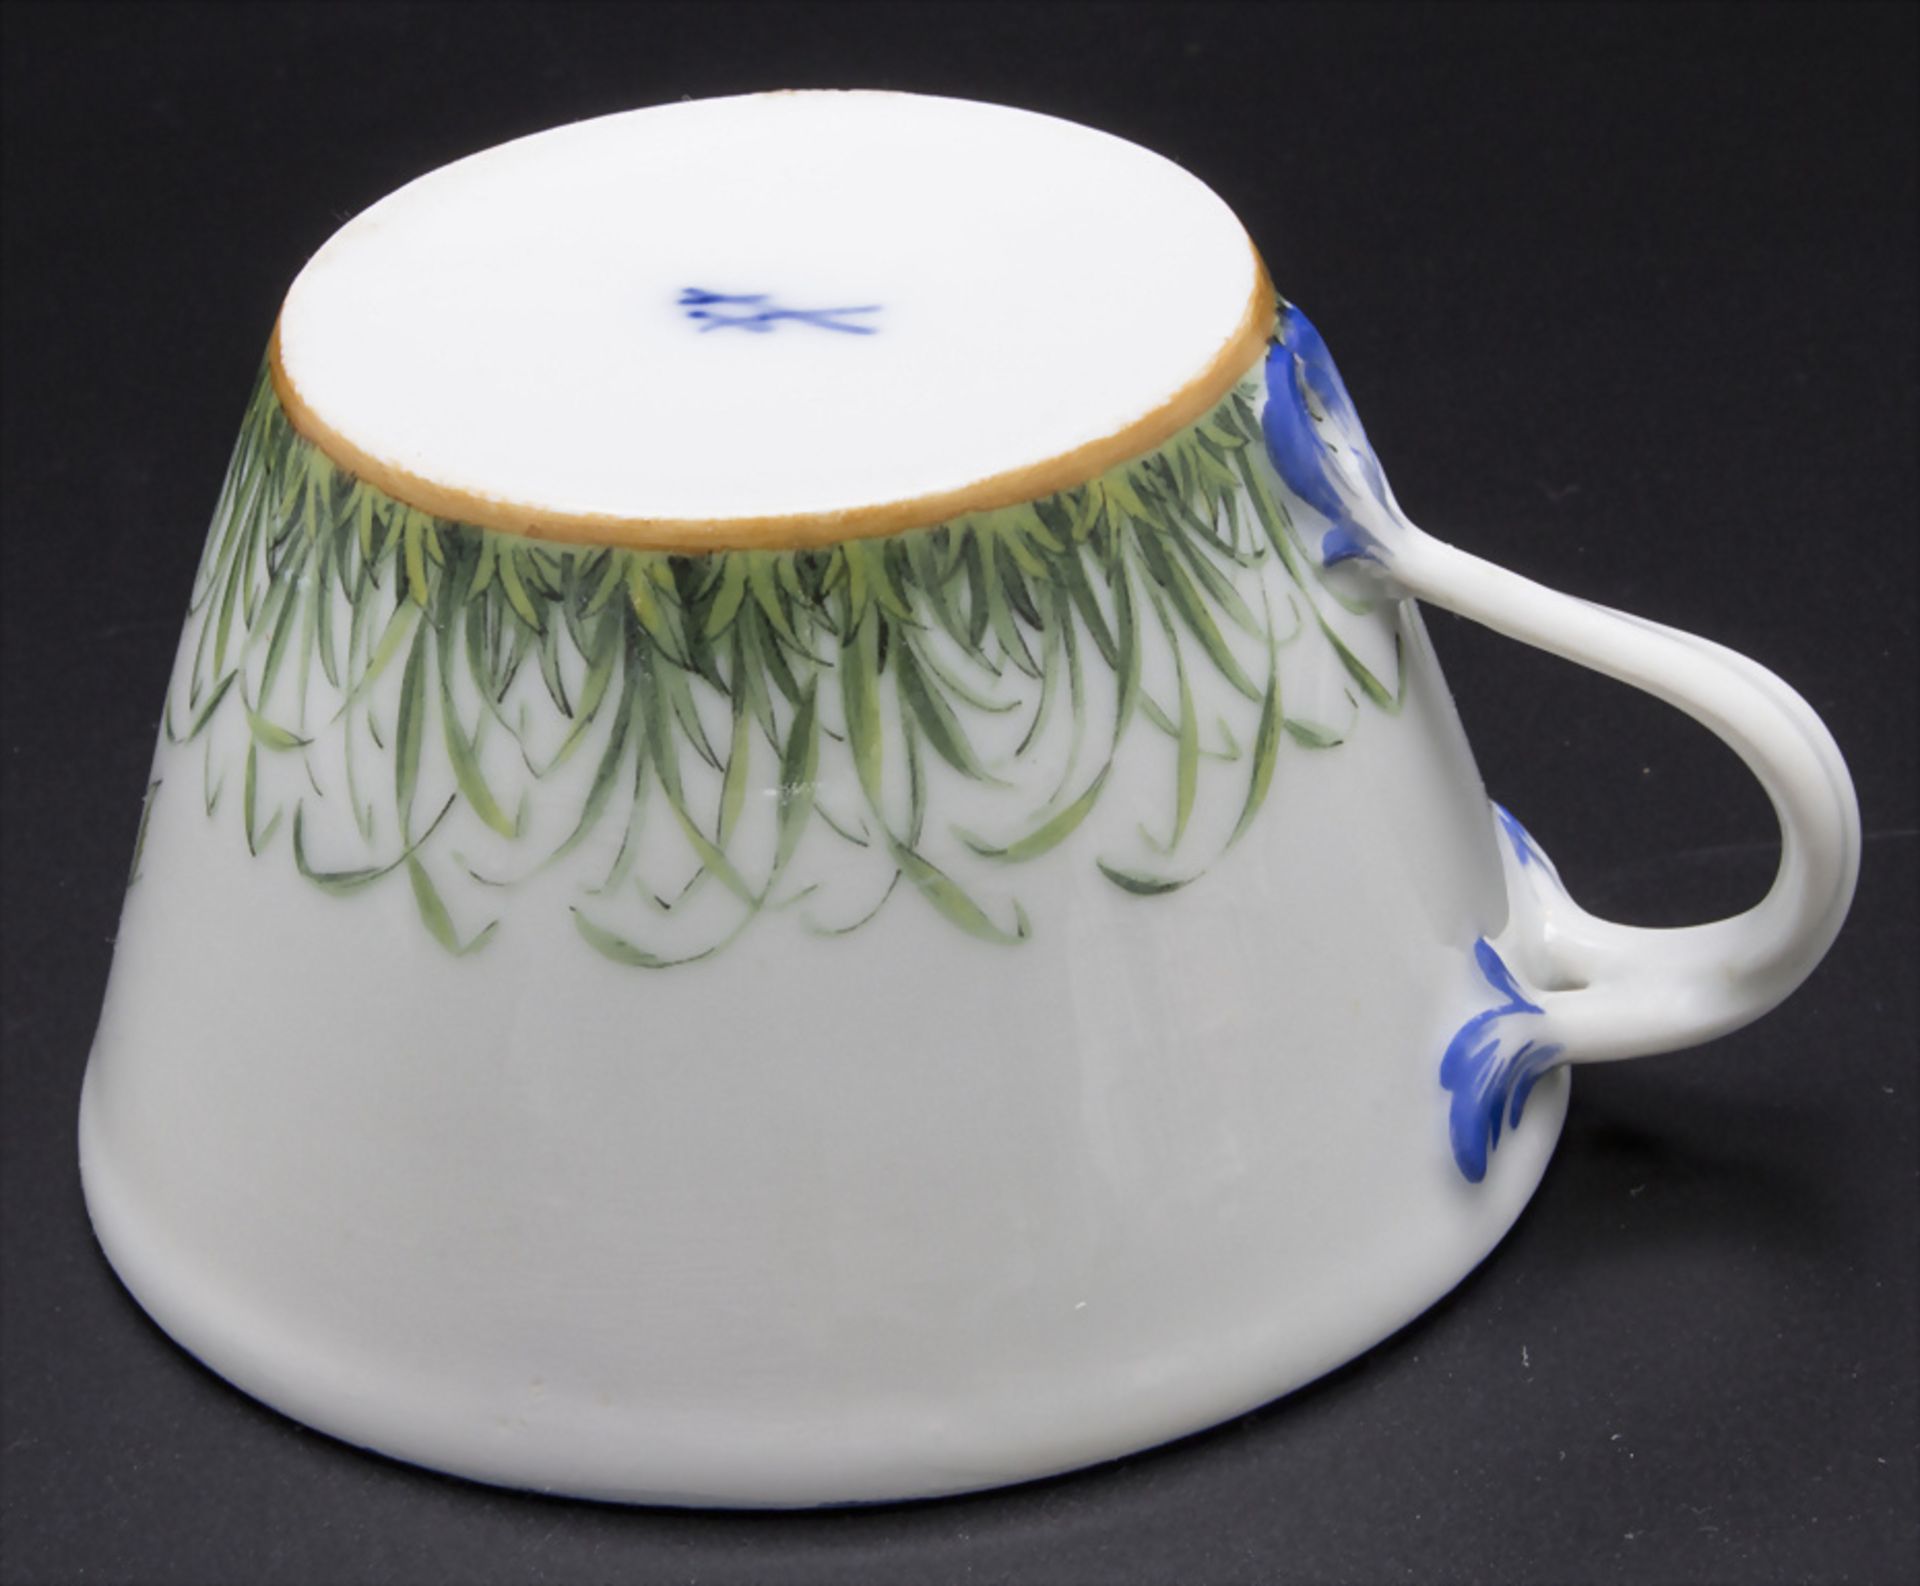 Tasse und UT mit Monogramm / A cup with saucer with monogram, Meissen, Anfang 19. Jh. - Image 13 of 18